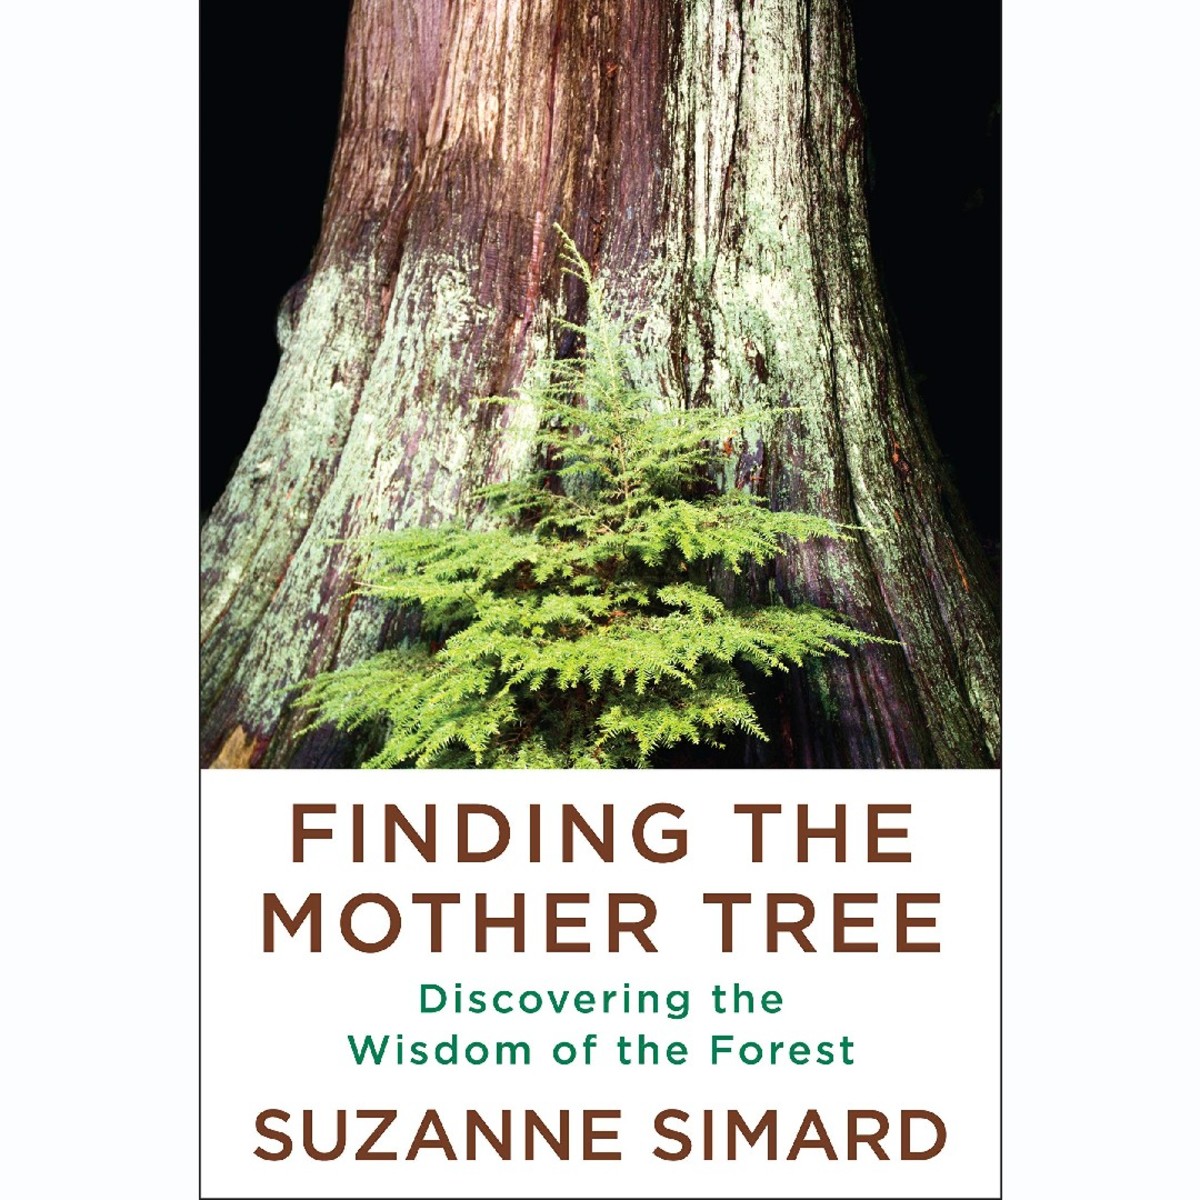 Finding the Mother Tree: Discovering the Wisdom of the Forest by Suzanne Simard